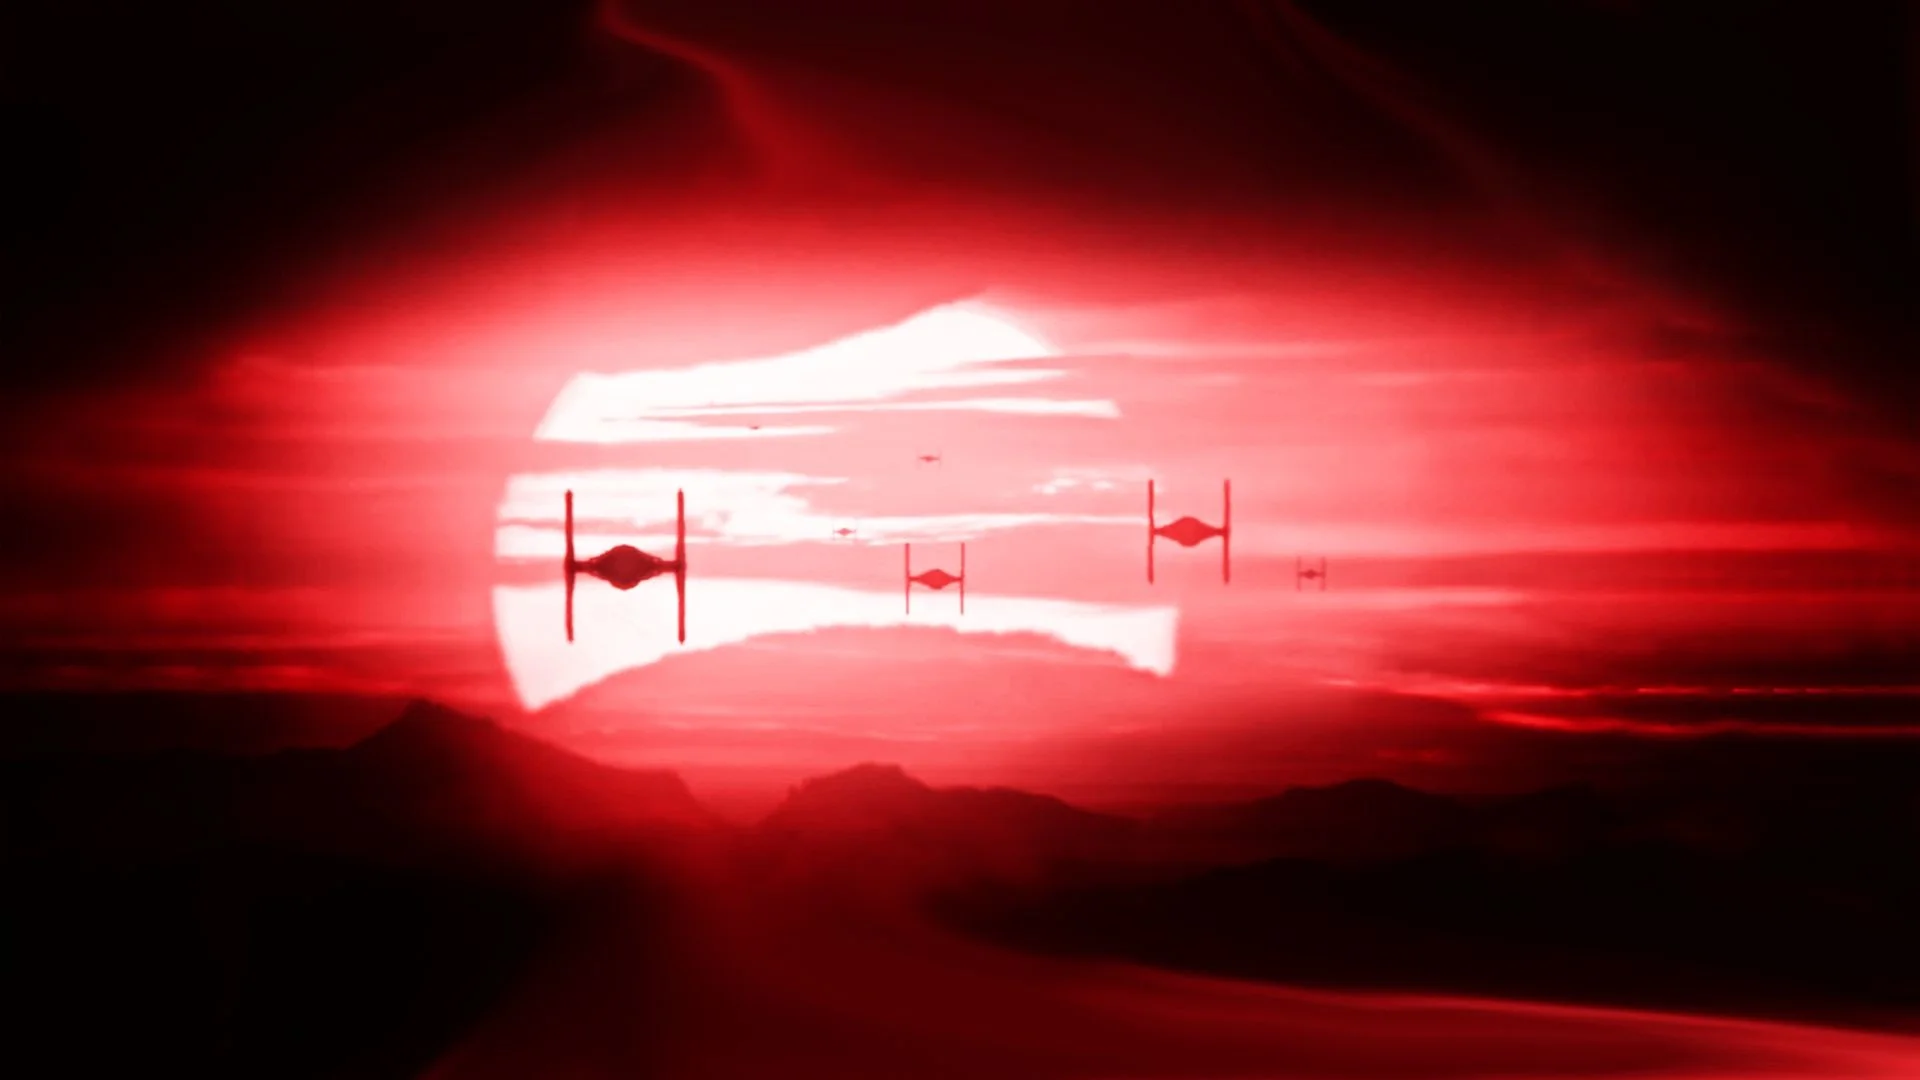 Star Wars The Force Awakens TIE Fighters Backgrounds